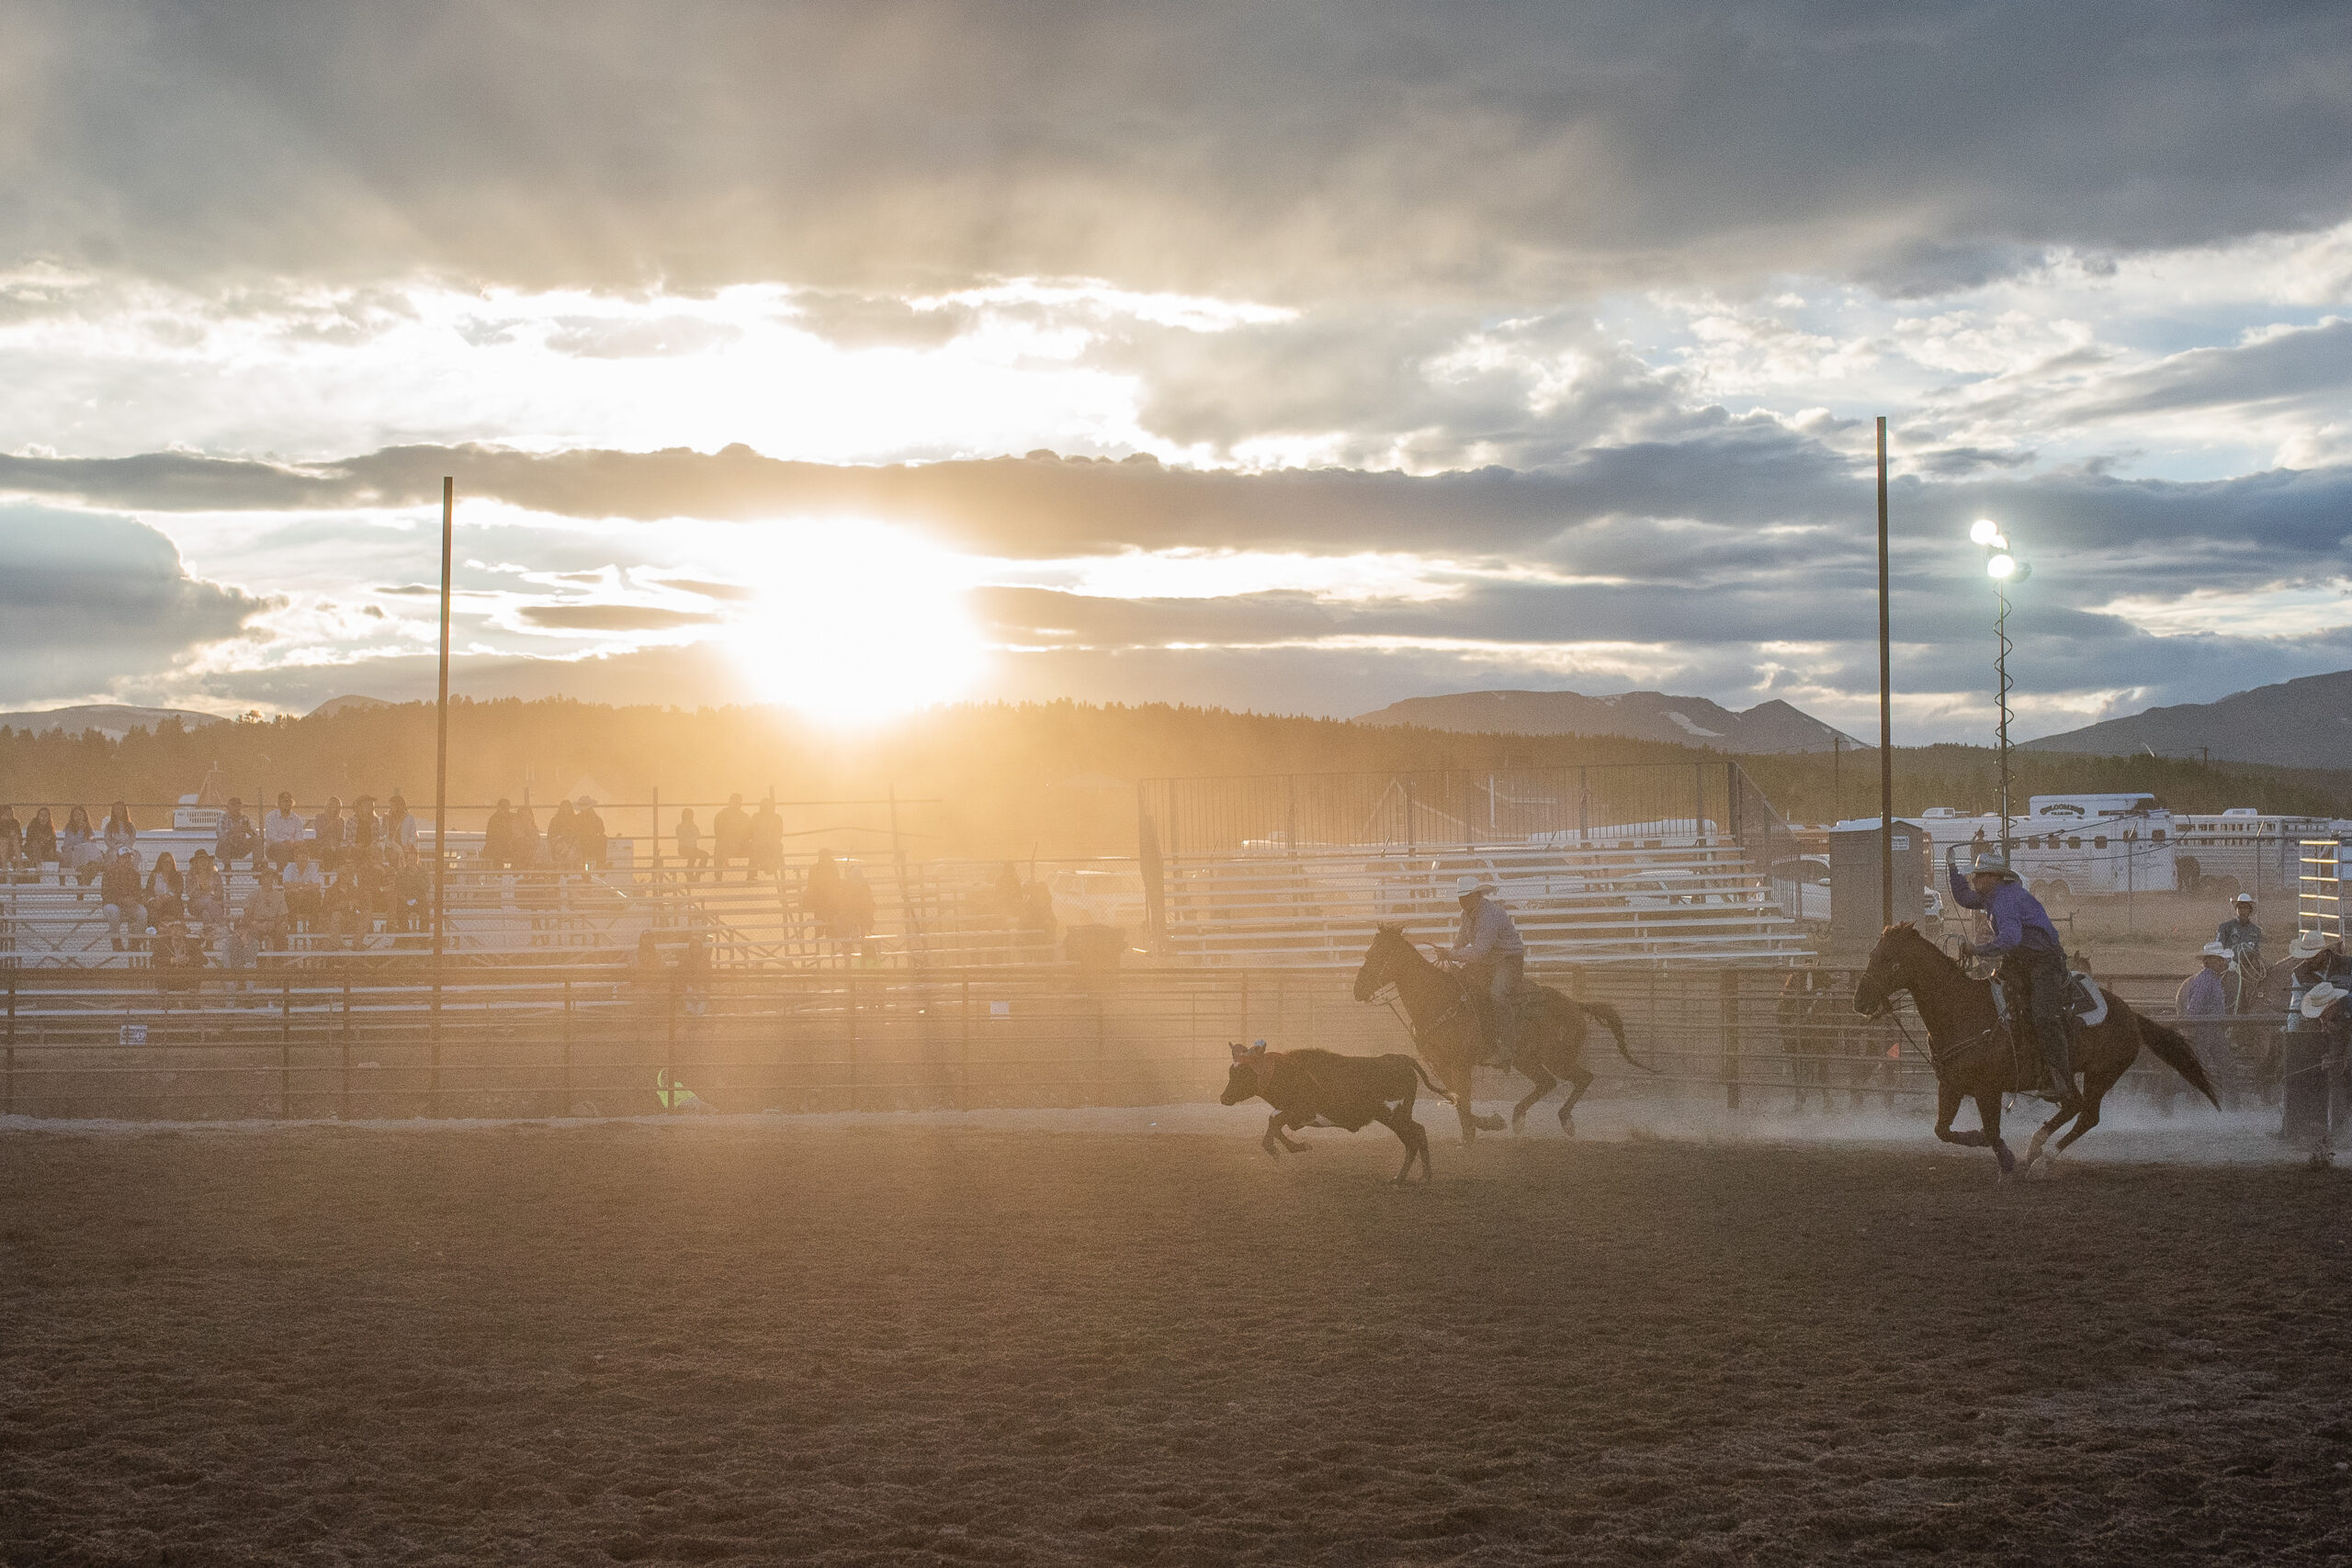 Team roping event at Park County Rodeo